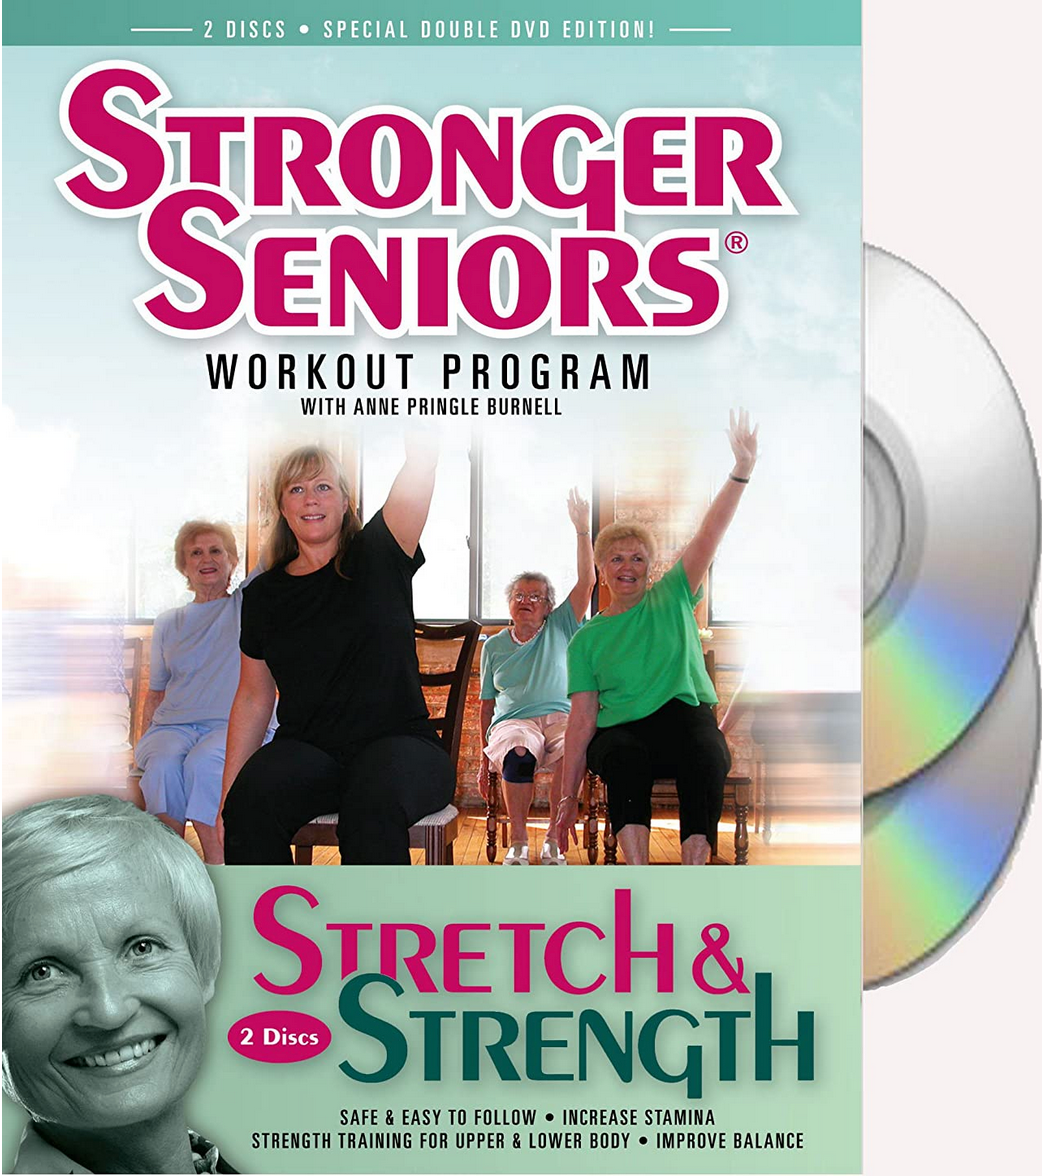 Stretch and Strength Chair Exercise DVD Video - Stronger Seniors Chair Exercise Programs